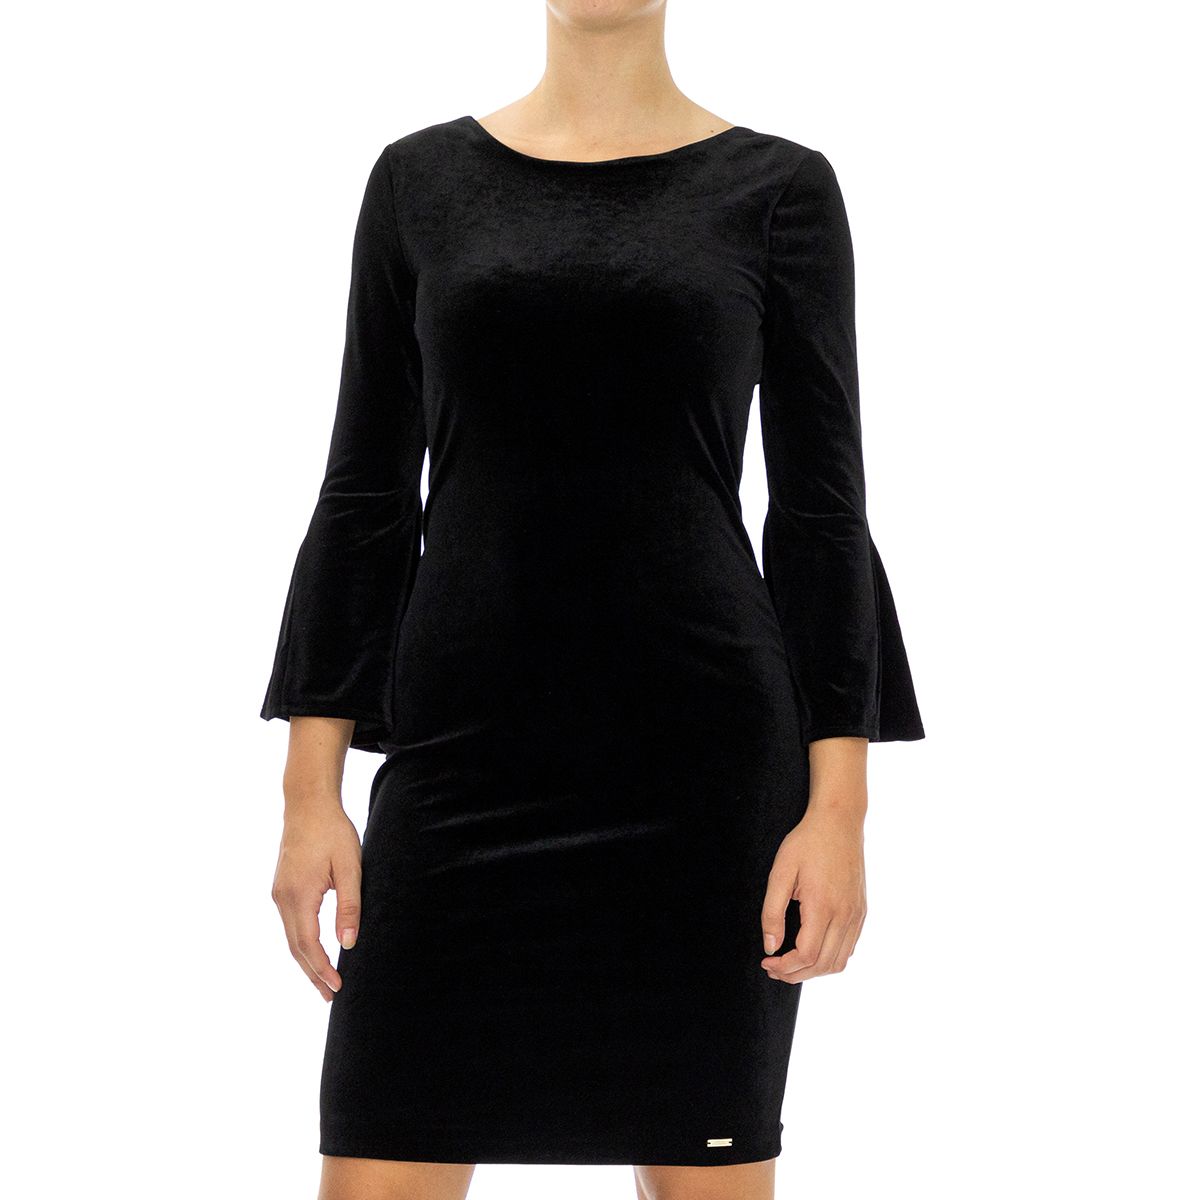 Armani Exchange 6ZYABPYJQ9Z-1200-XS Fall in love with this velvet black dress, which will be perfect for a party or a night out.